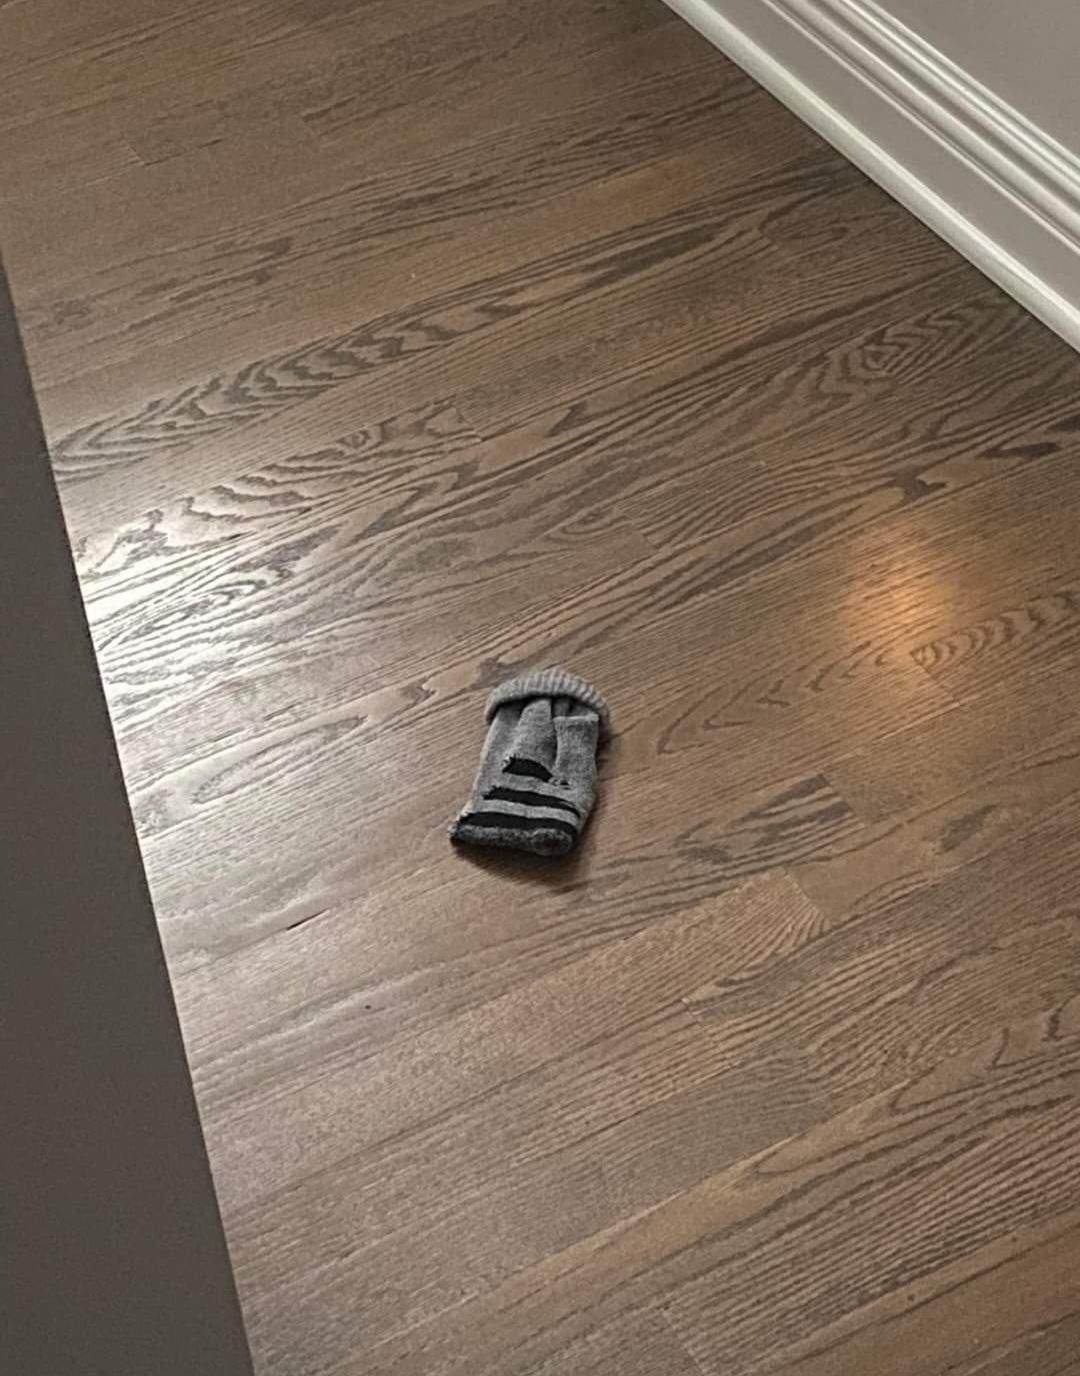 Someone dropped their sock